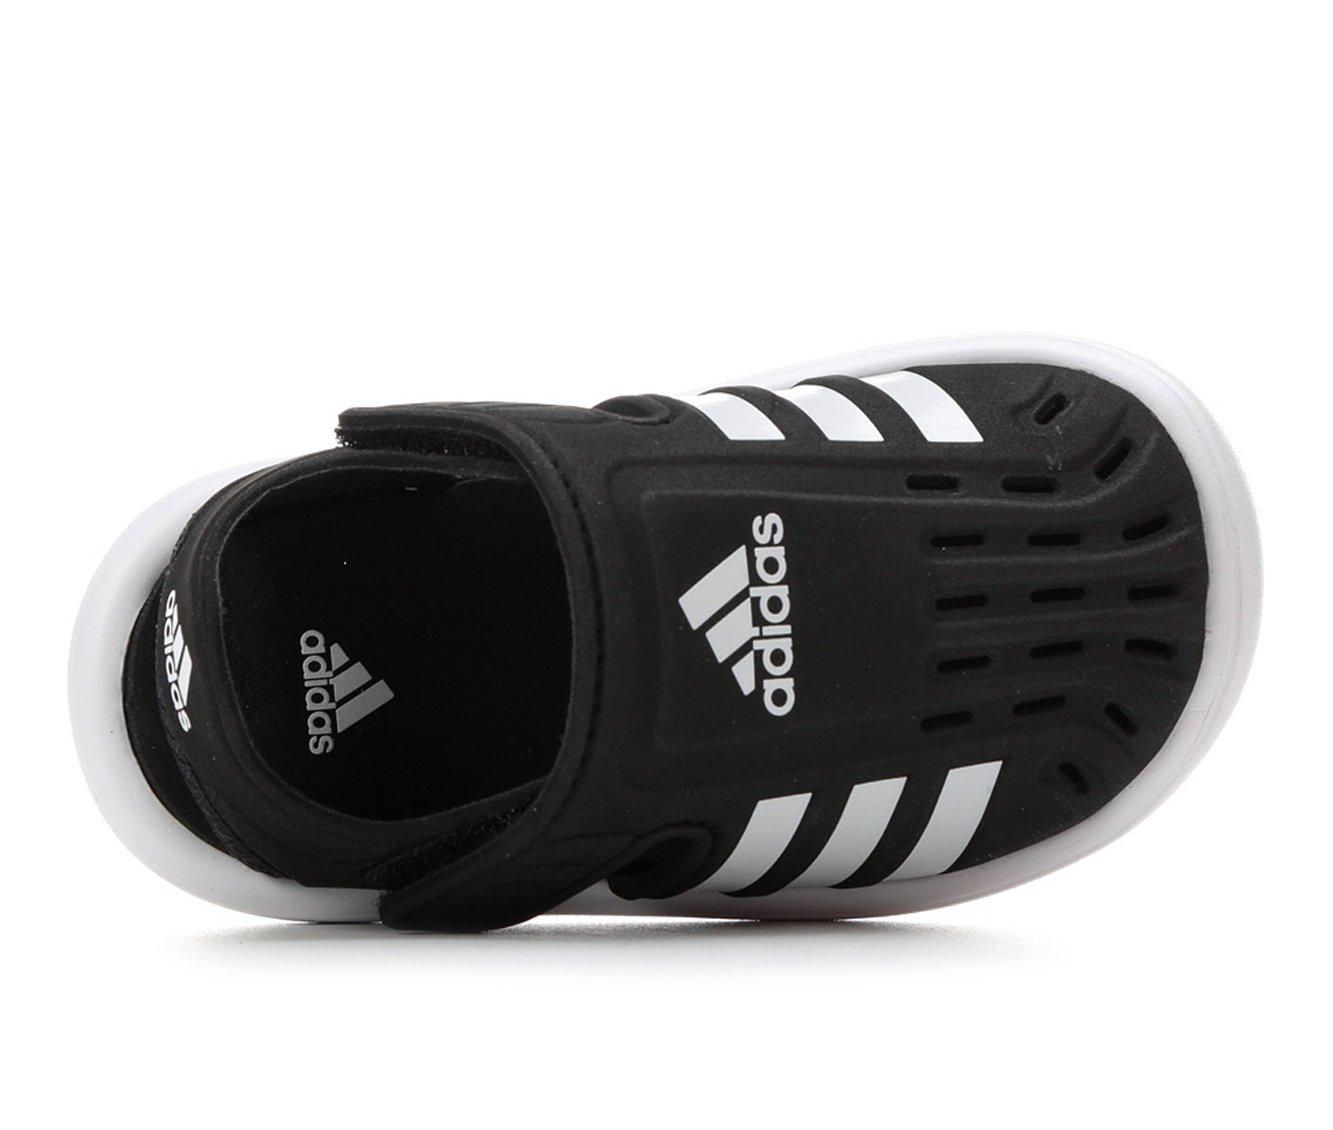 Boys' Adidas Infant & Toddler Toe Water Sandals